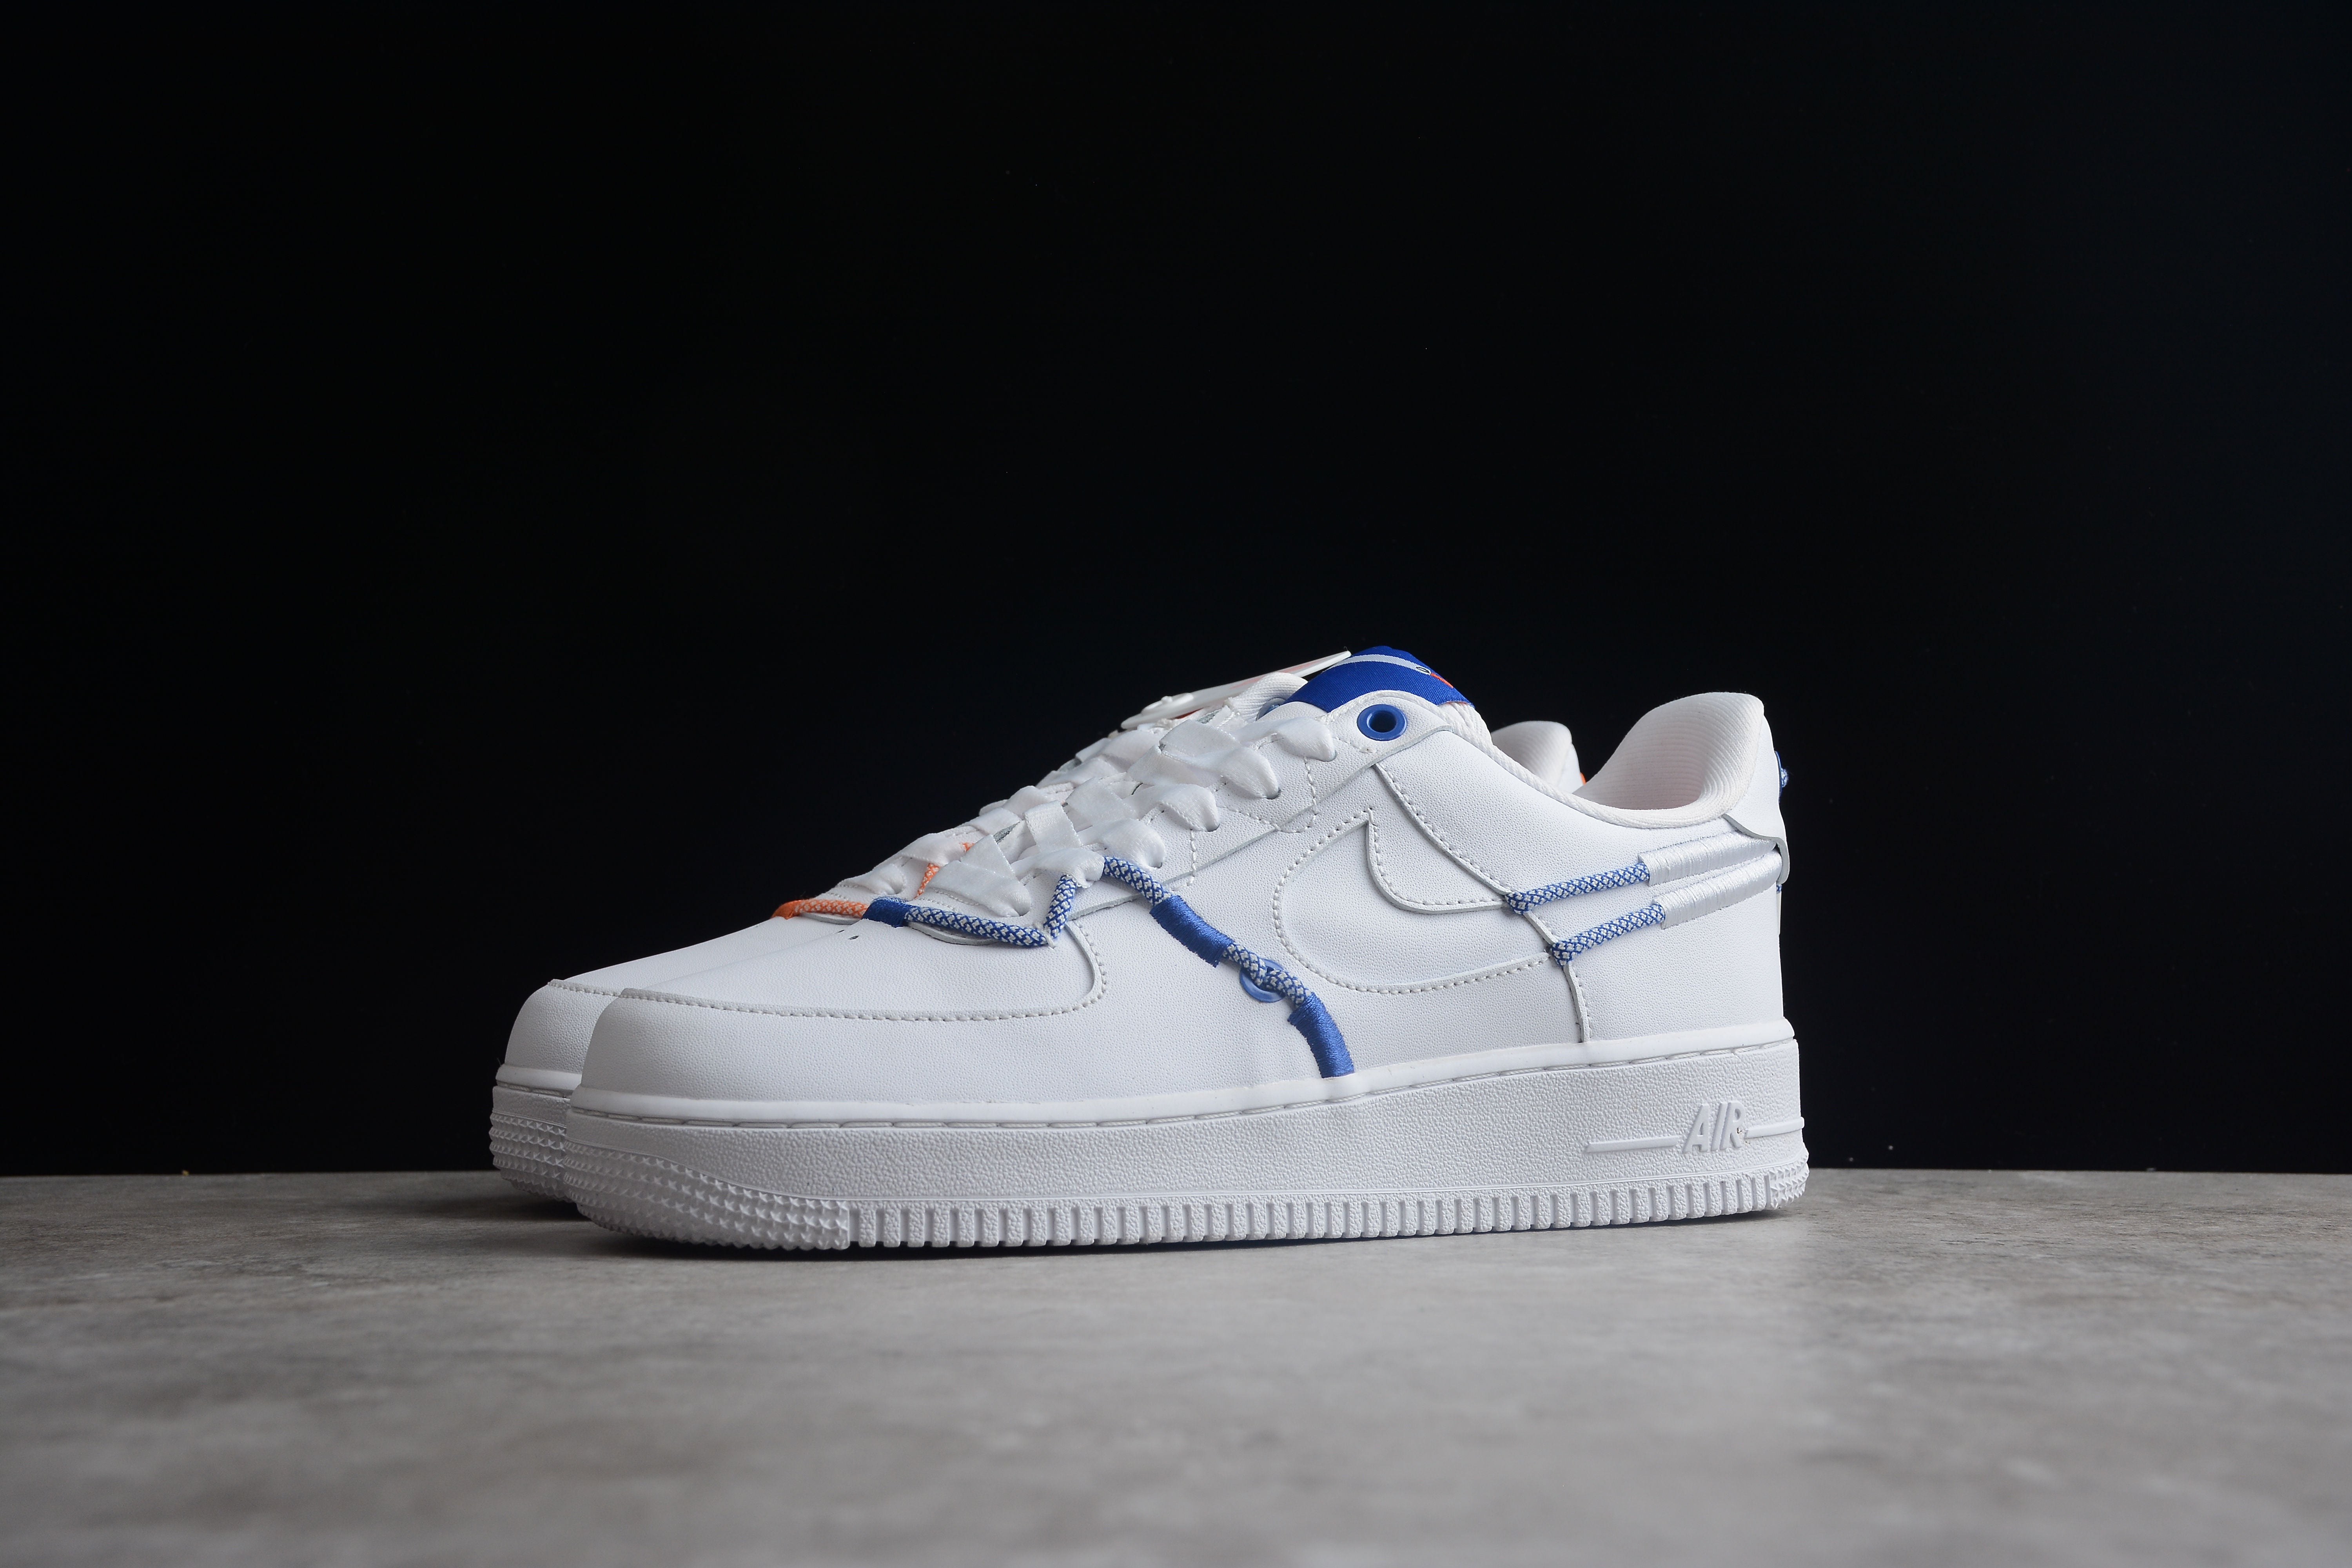 Nike airforce A1 blue rope shoes